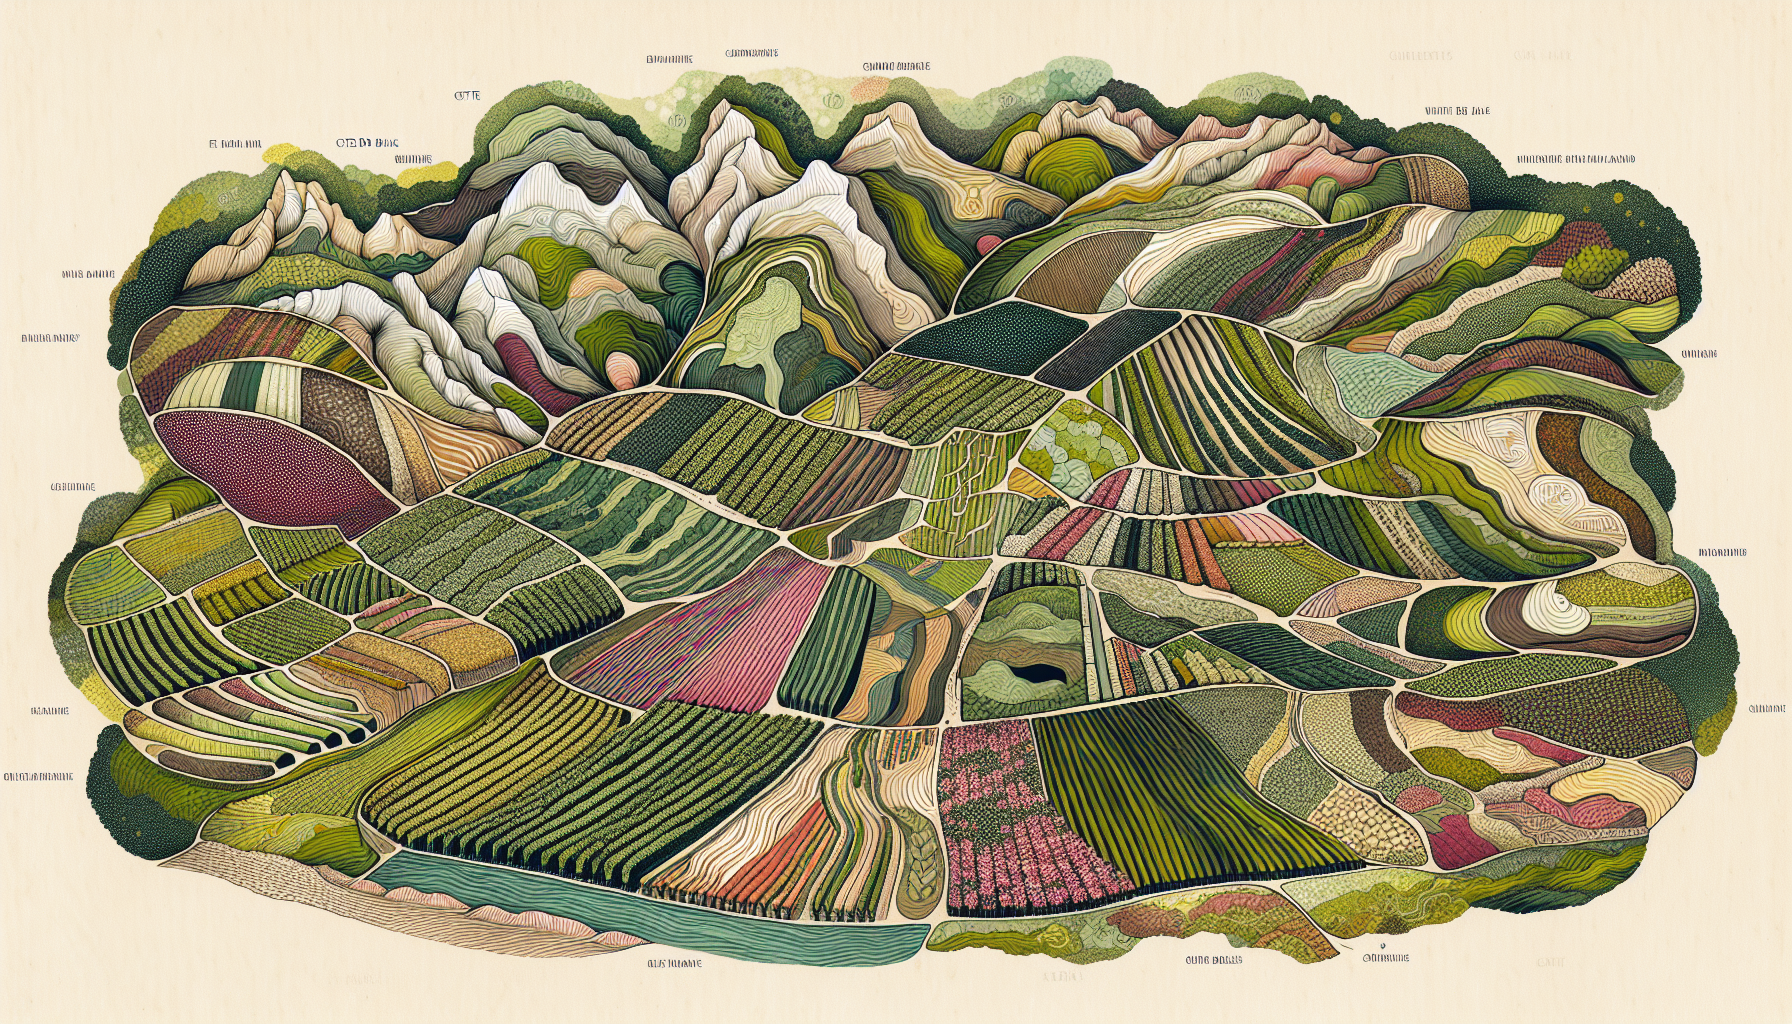 Illustration of diverse terroirs in the Champagne region